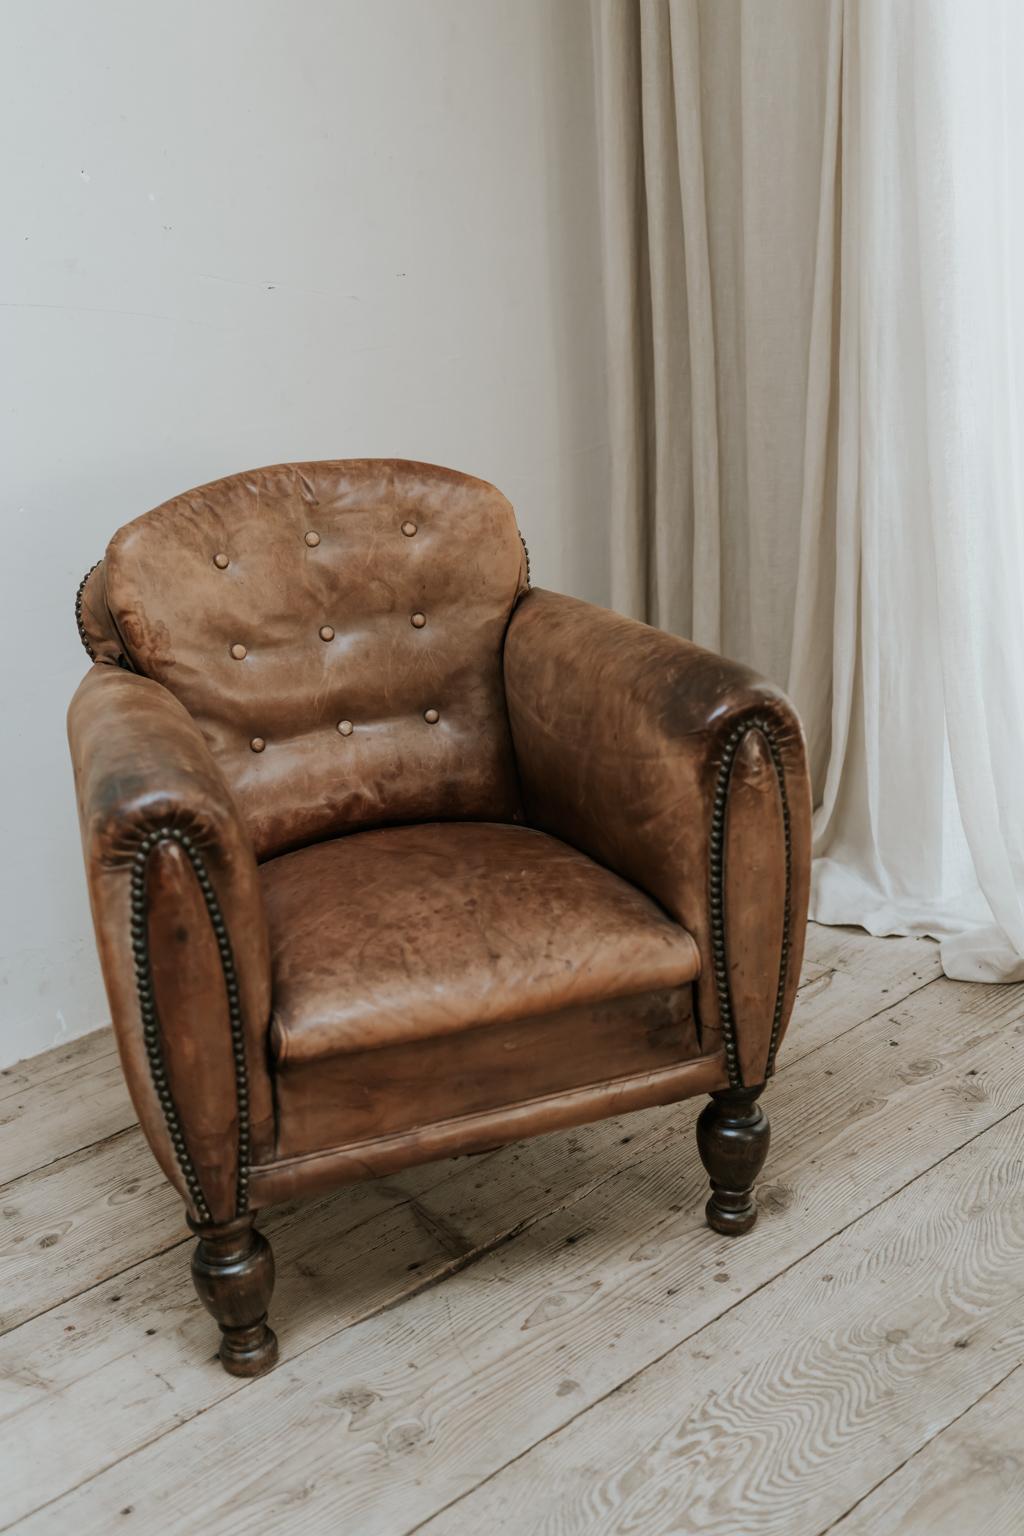 French Leather Armchair/Clubchair from the 1930s (20. Jahrhundert)